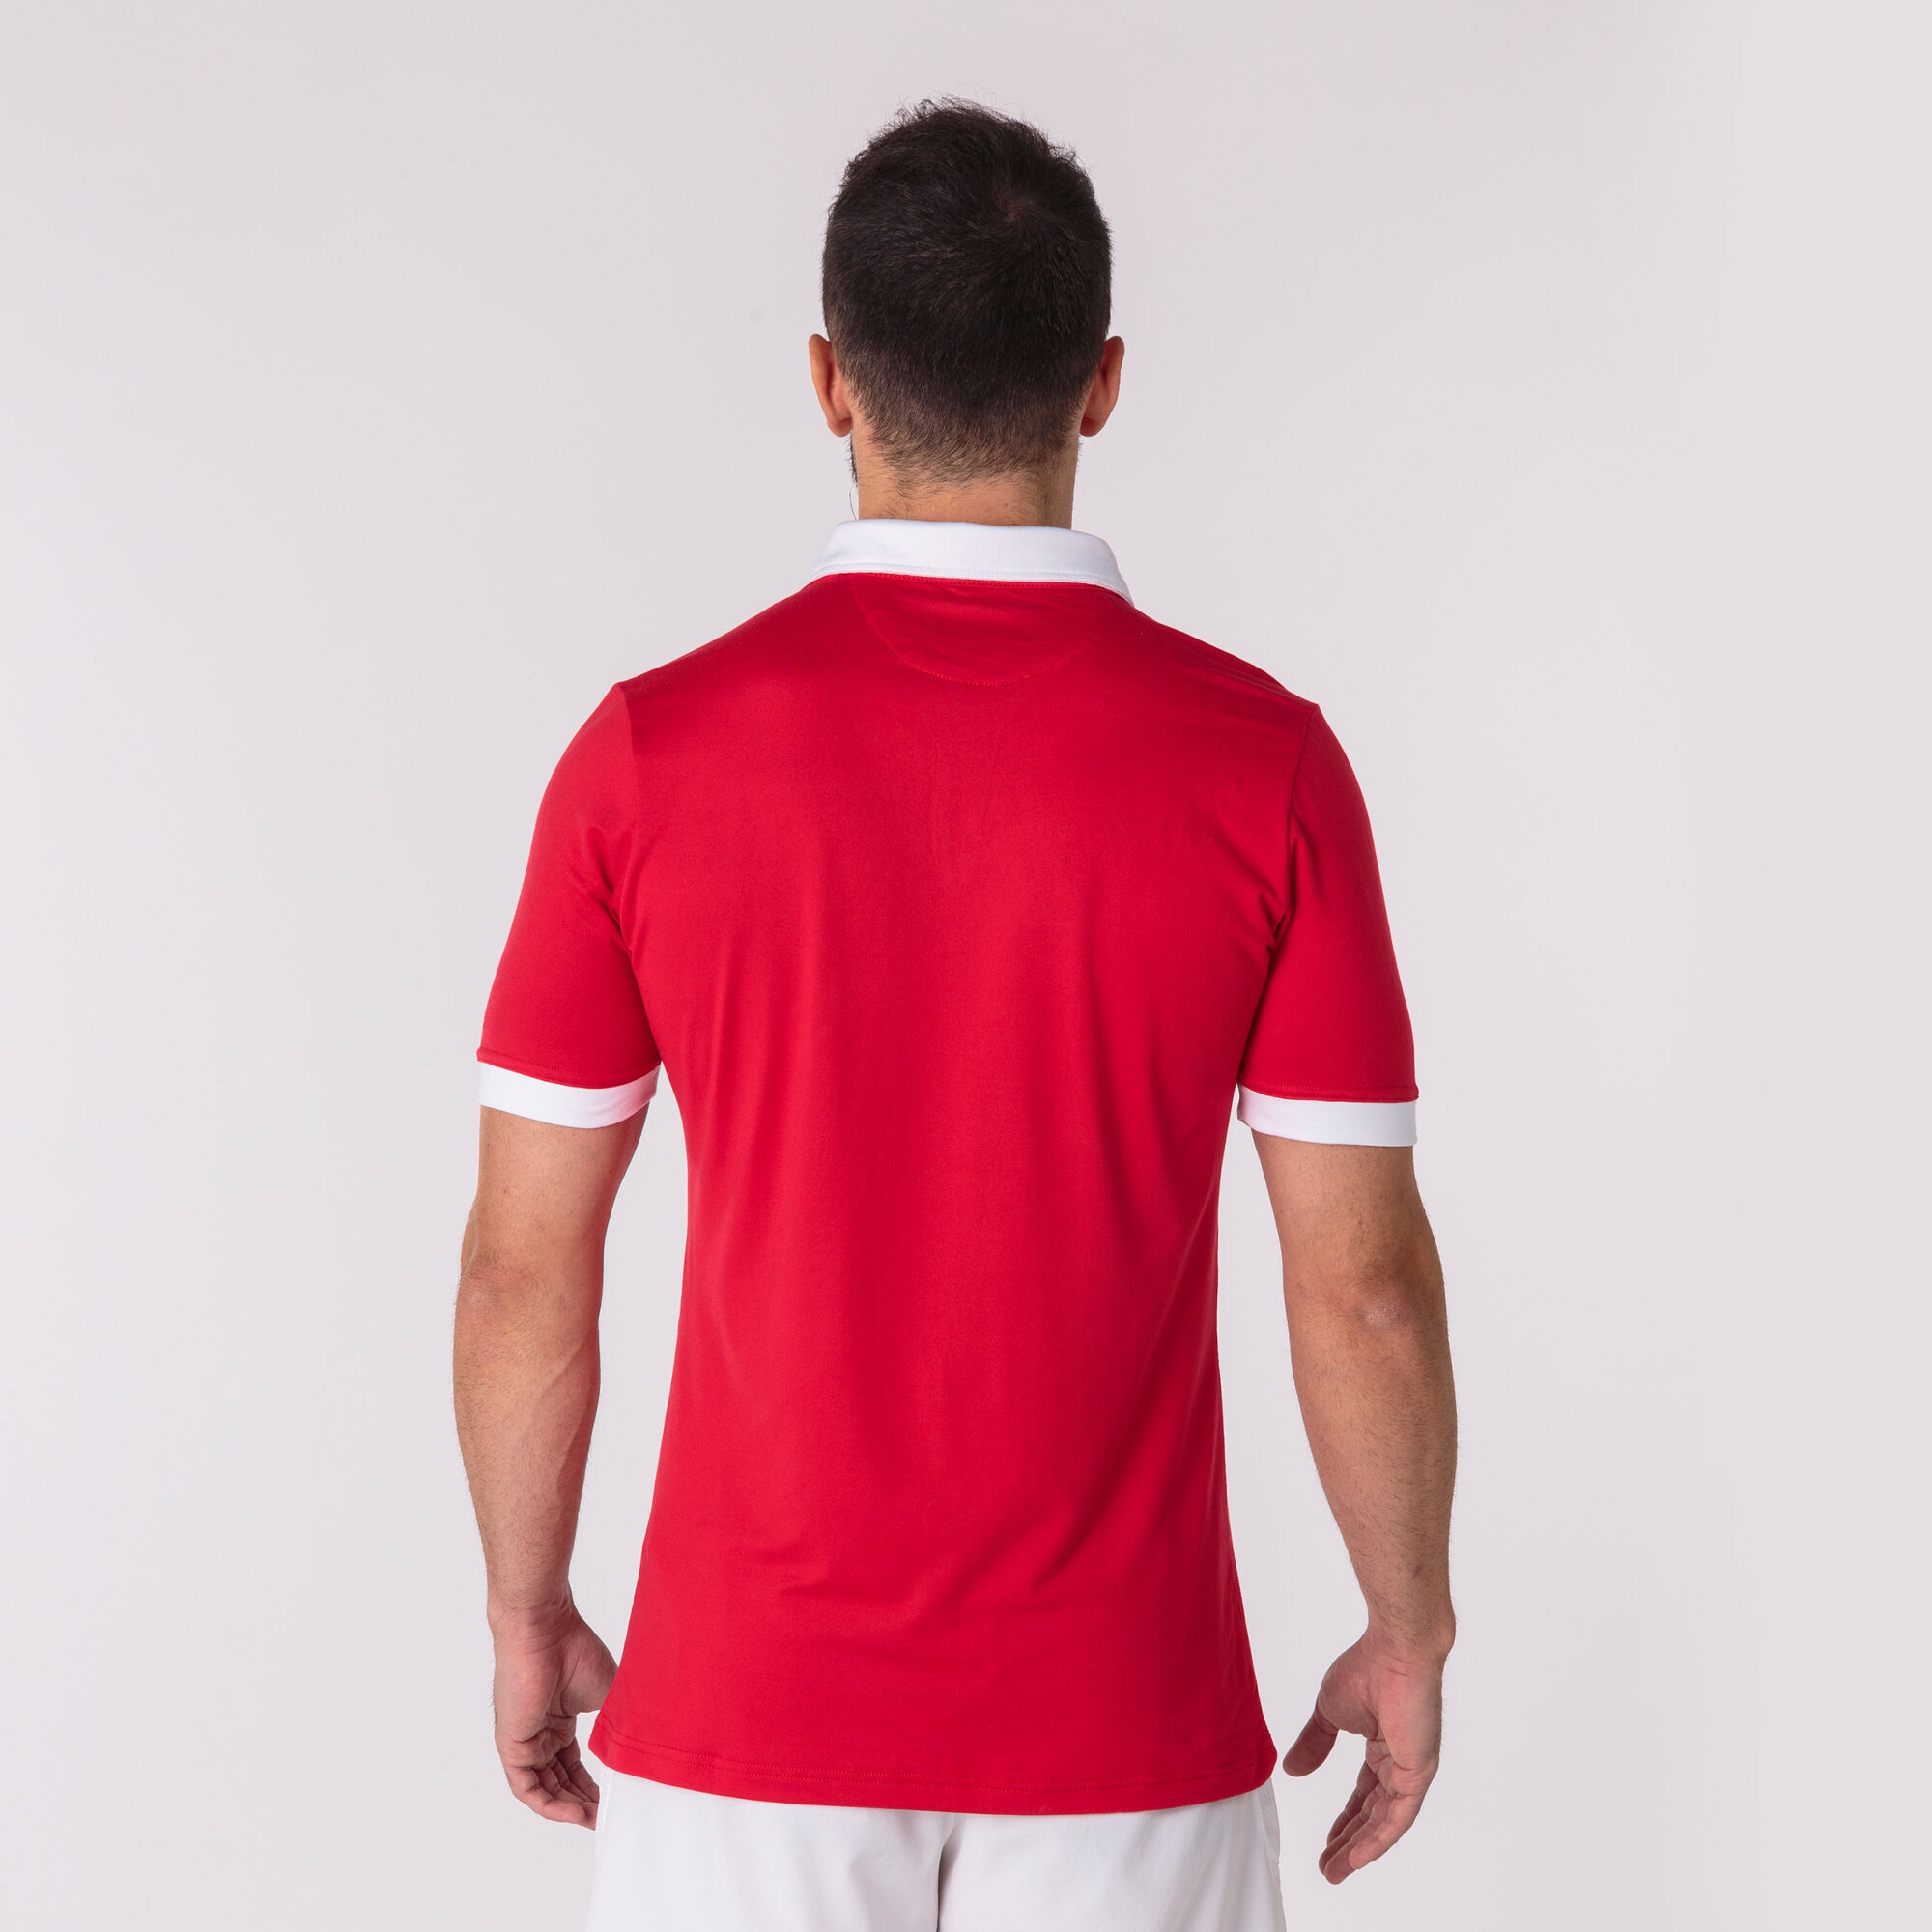 MAILLOT MANCHES COURTES HOMME GOLD II ROUGE BLANC